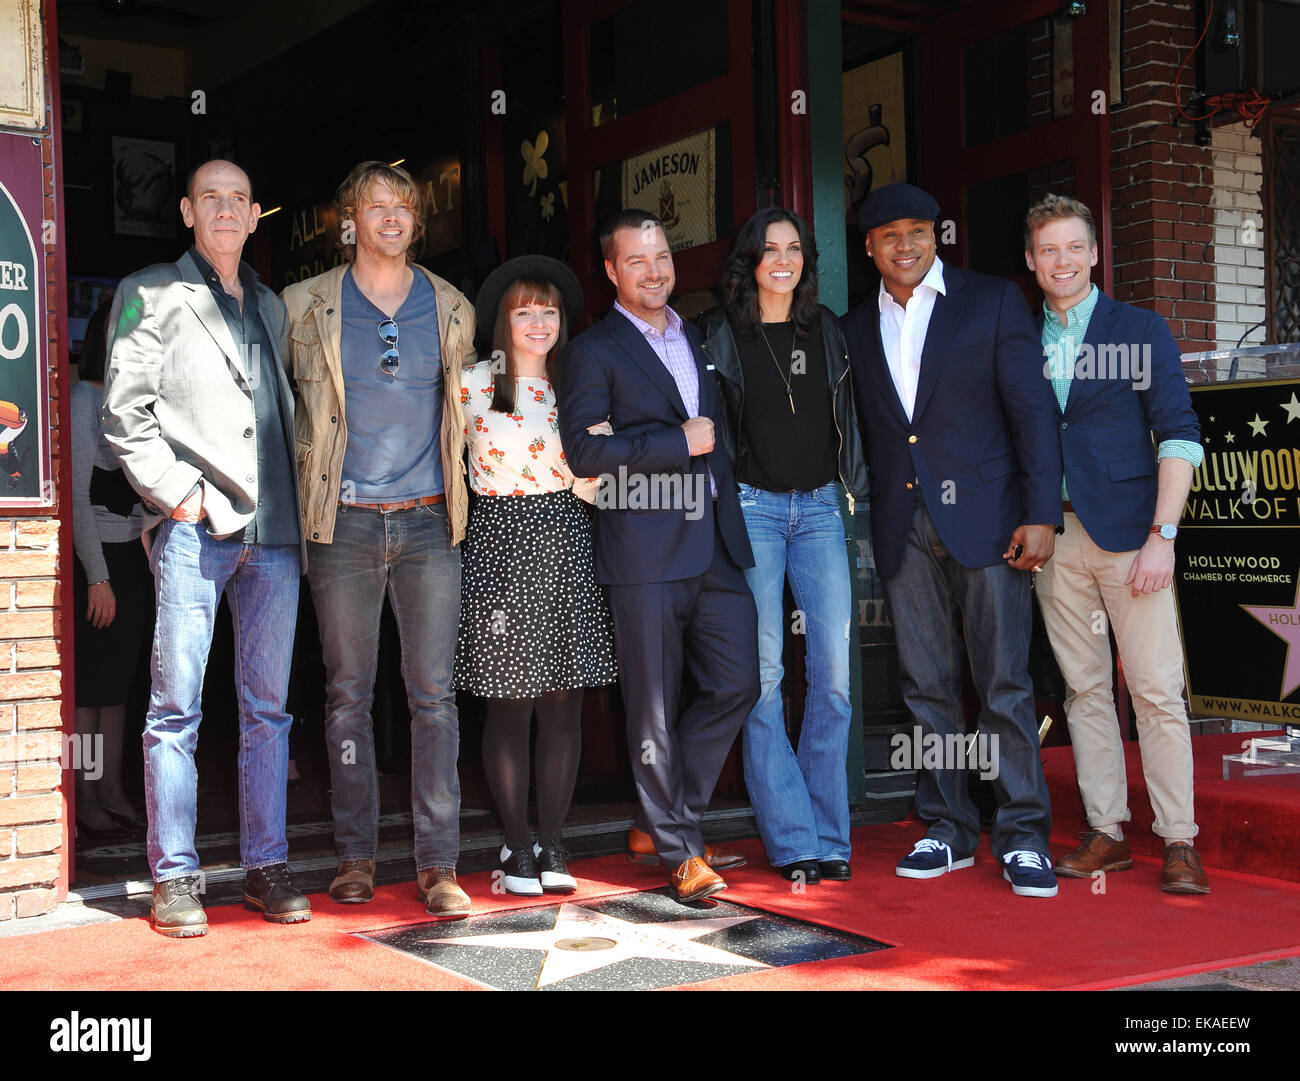 LOS ANGELES, CA - MARCH 5, 2015: 'NCIS: Los Angeles' stars Miguel Ferrer (left), Eric Christian Olsen, Renee Felice Smith, Chris O'Donnell, Daniela Ruah, LL Cool J & Barrett Foa on Hollywood Boulevard where Chris O'Donnell was honored with the 2,544th star on the Walk of Fame. Stock Photo